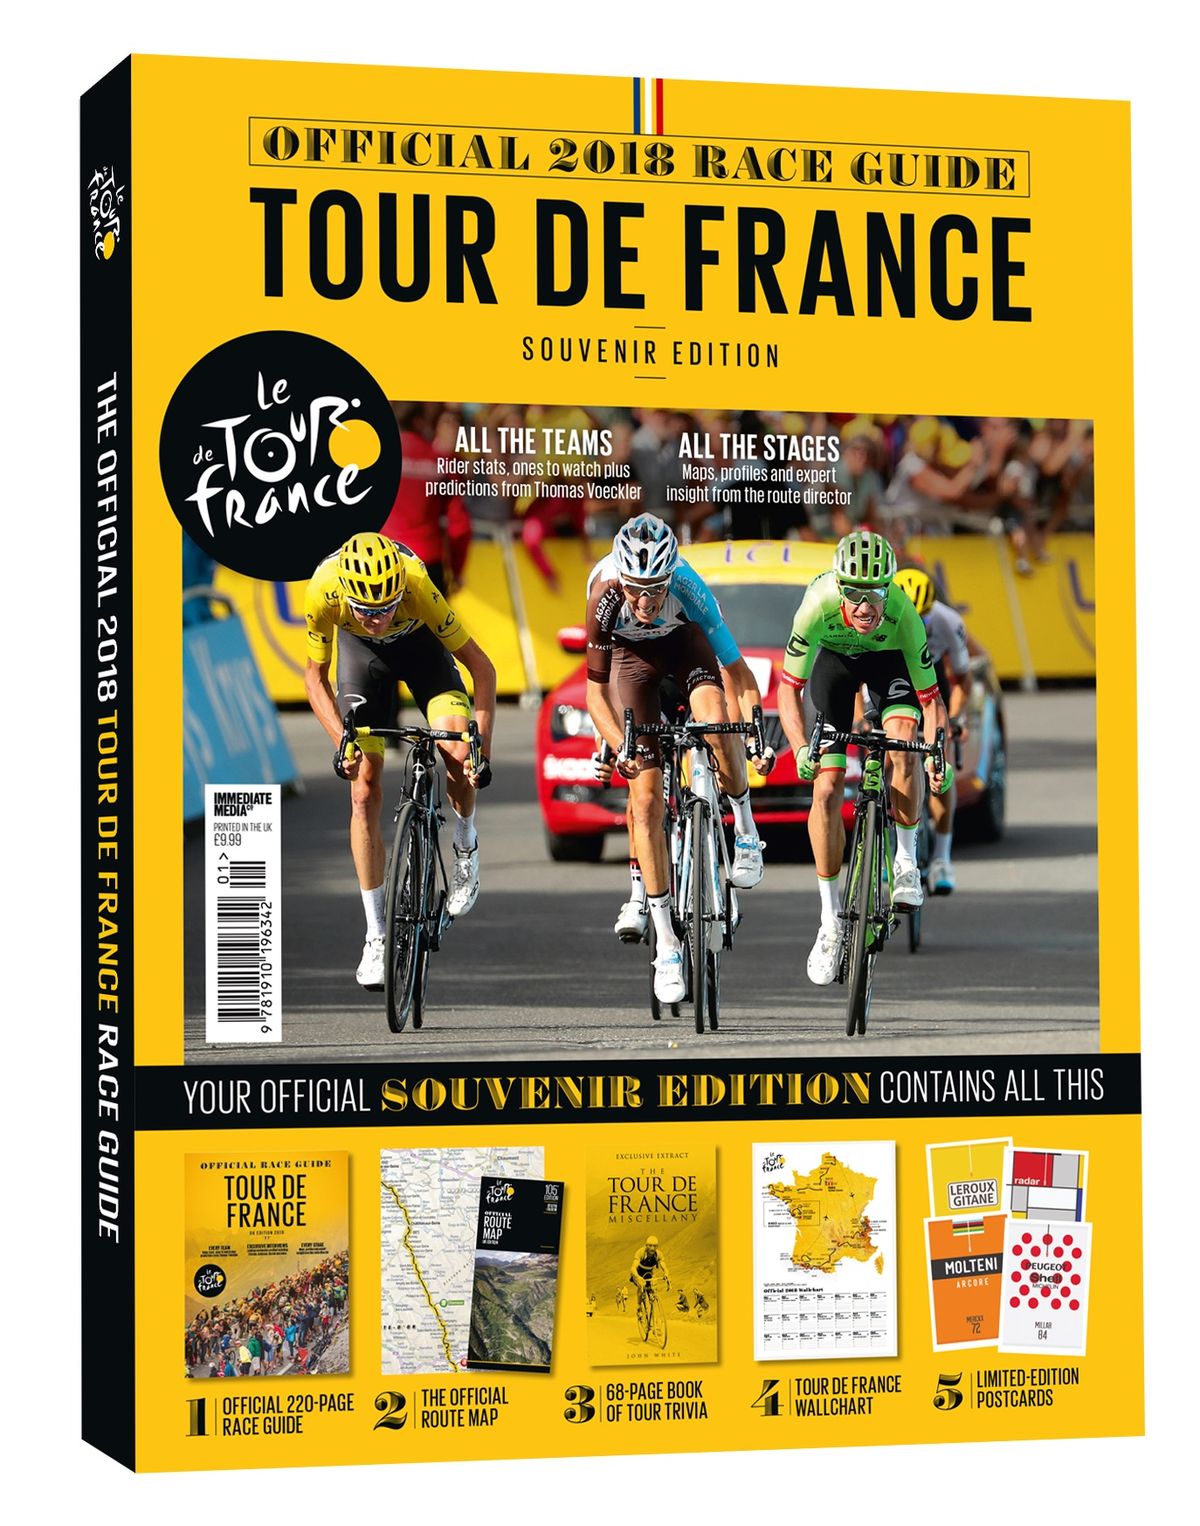 Official 2018 Tour de France Race Guide available to order | Cyclingnews